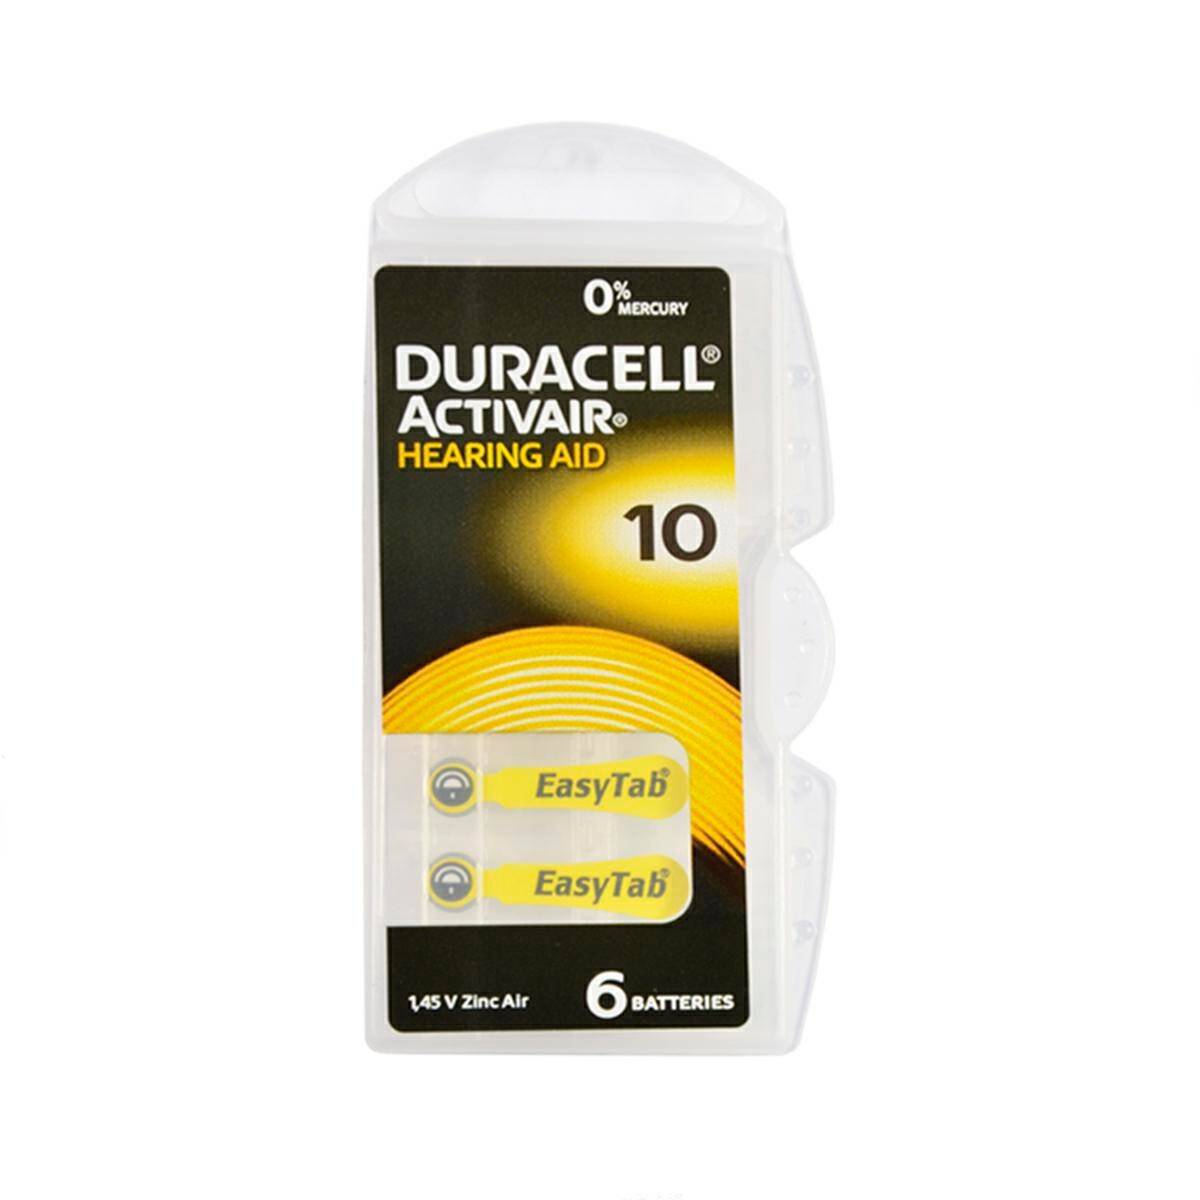 Battery Duracell Hearing AID 10 1,45V